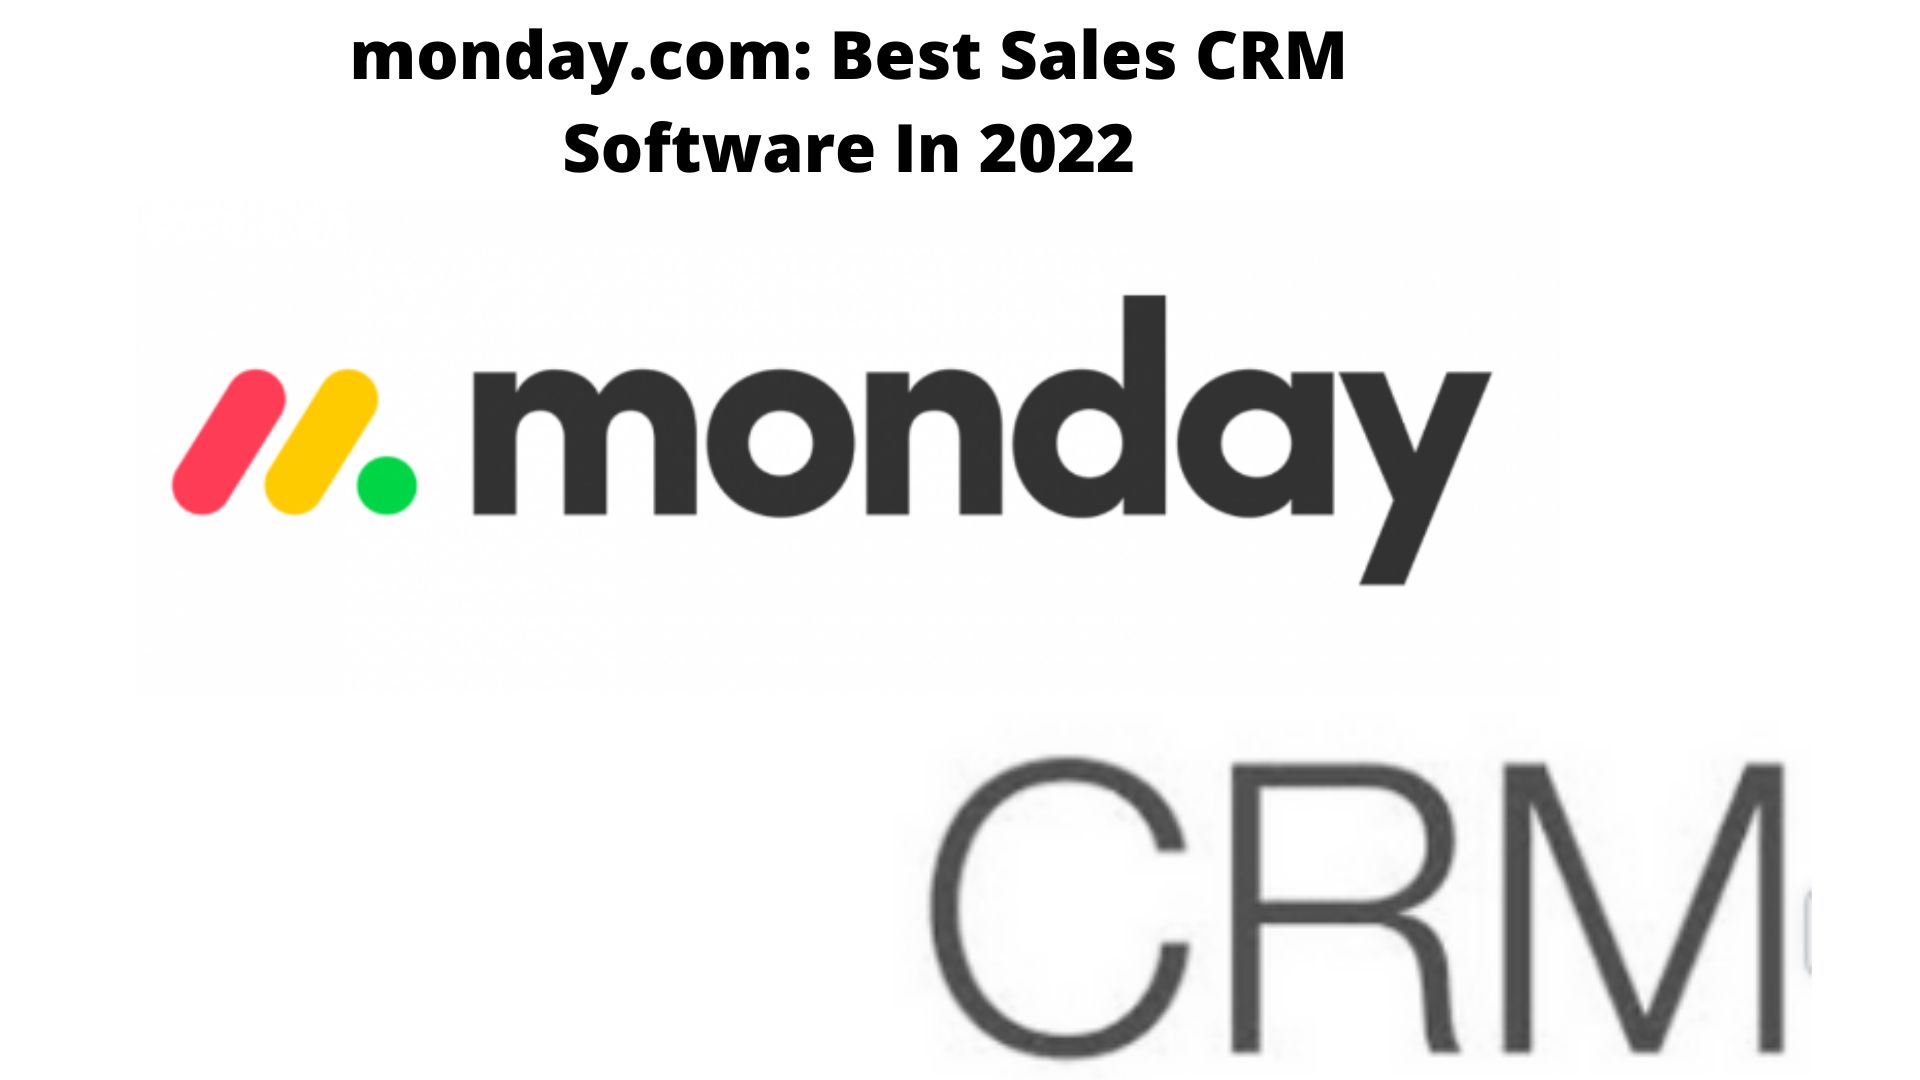 monday.com: Best Sales CRM Software In 2022